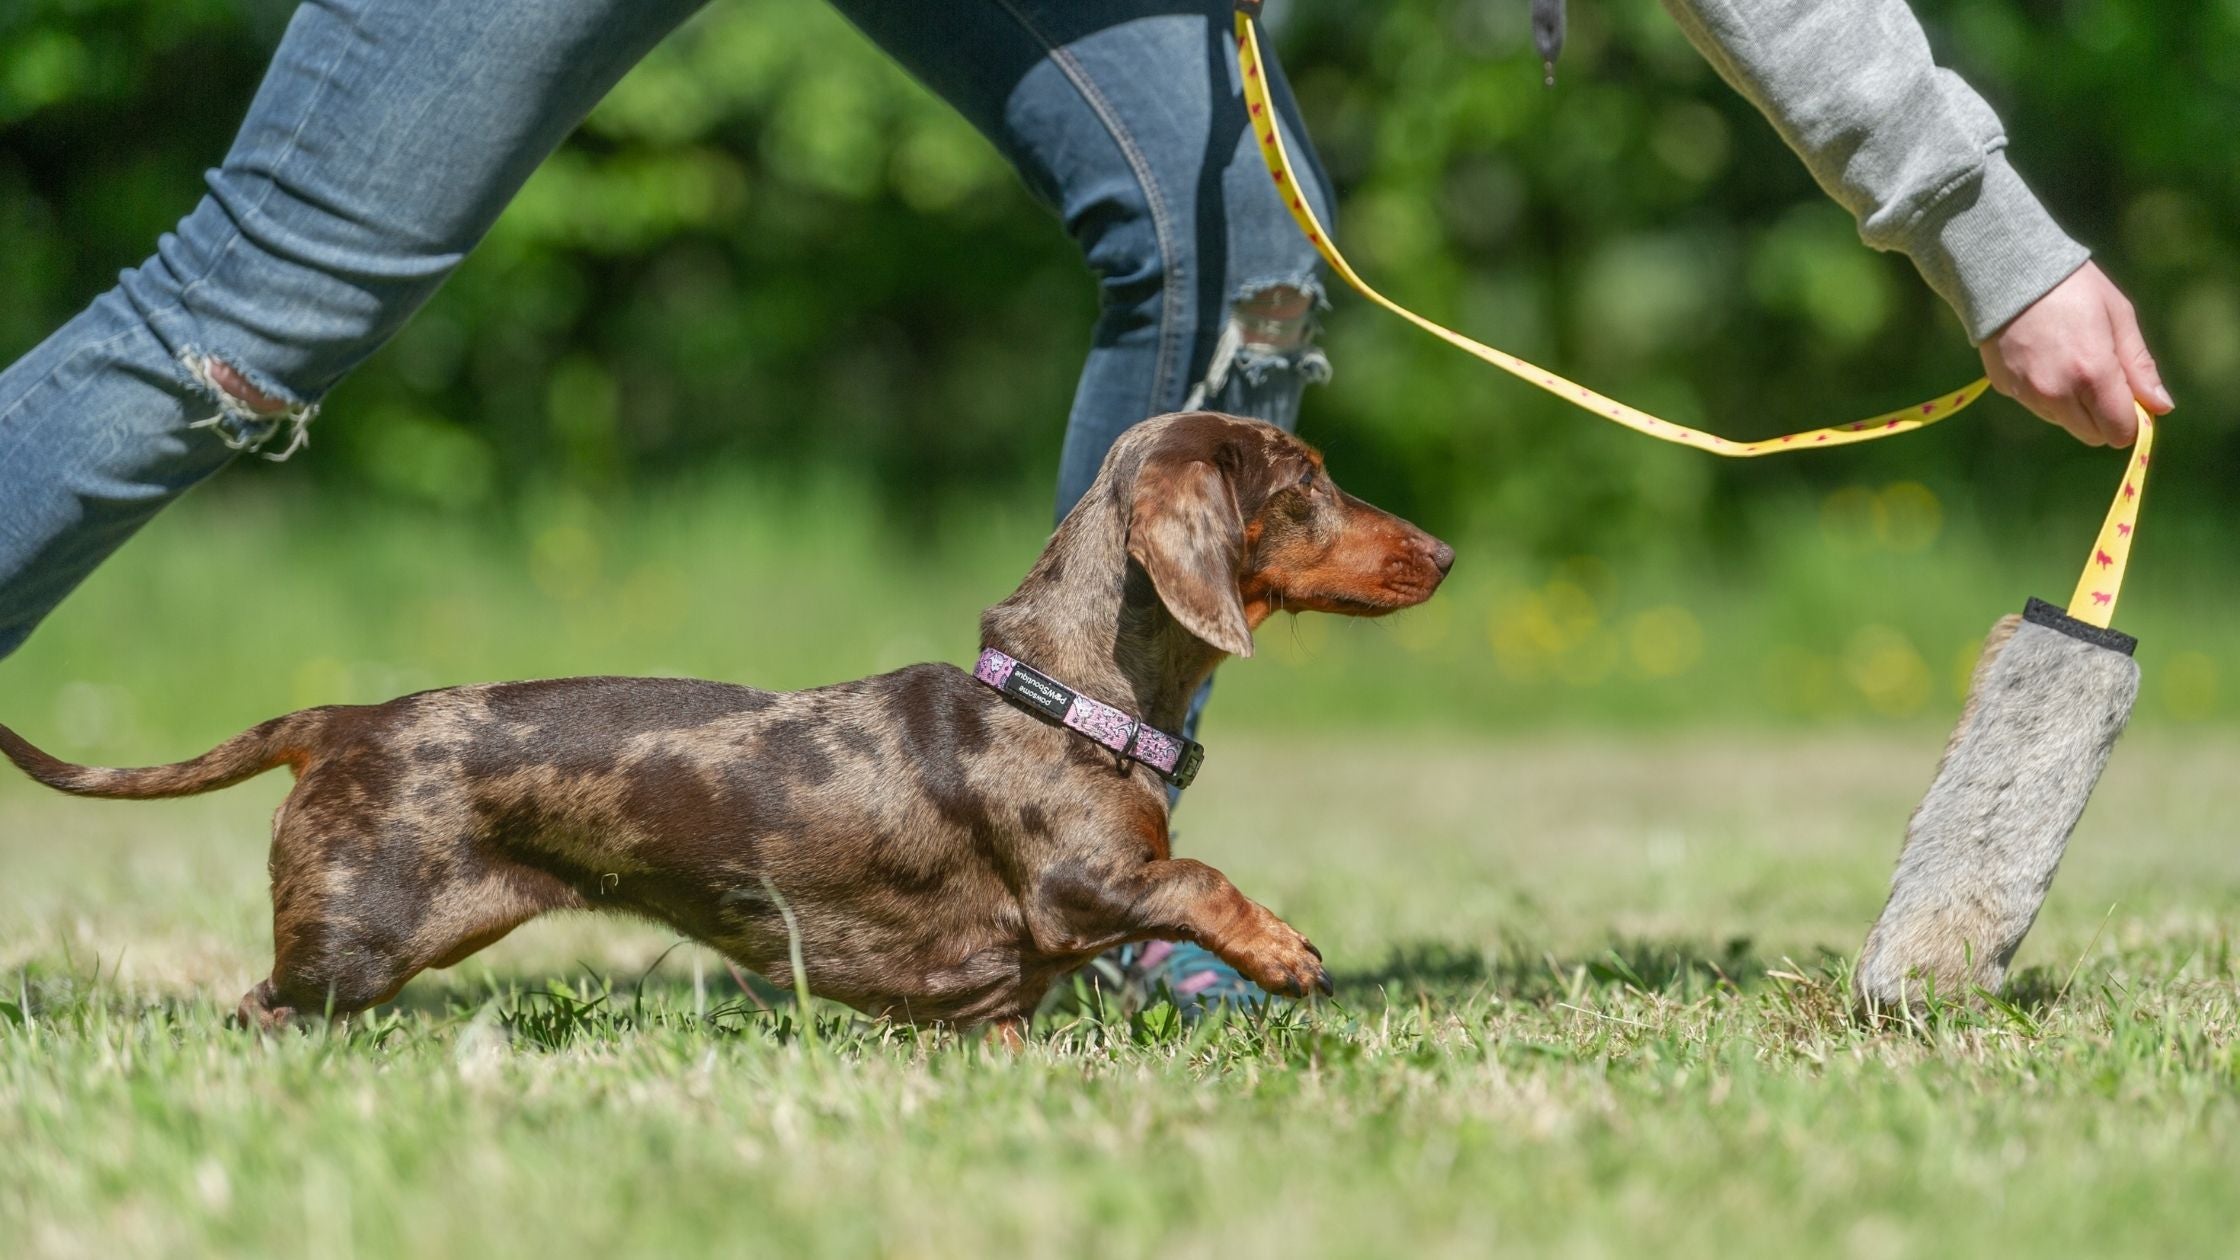 Looking for a suitable Toy for your Dachshund - Wag The Dog UK